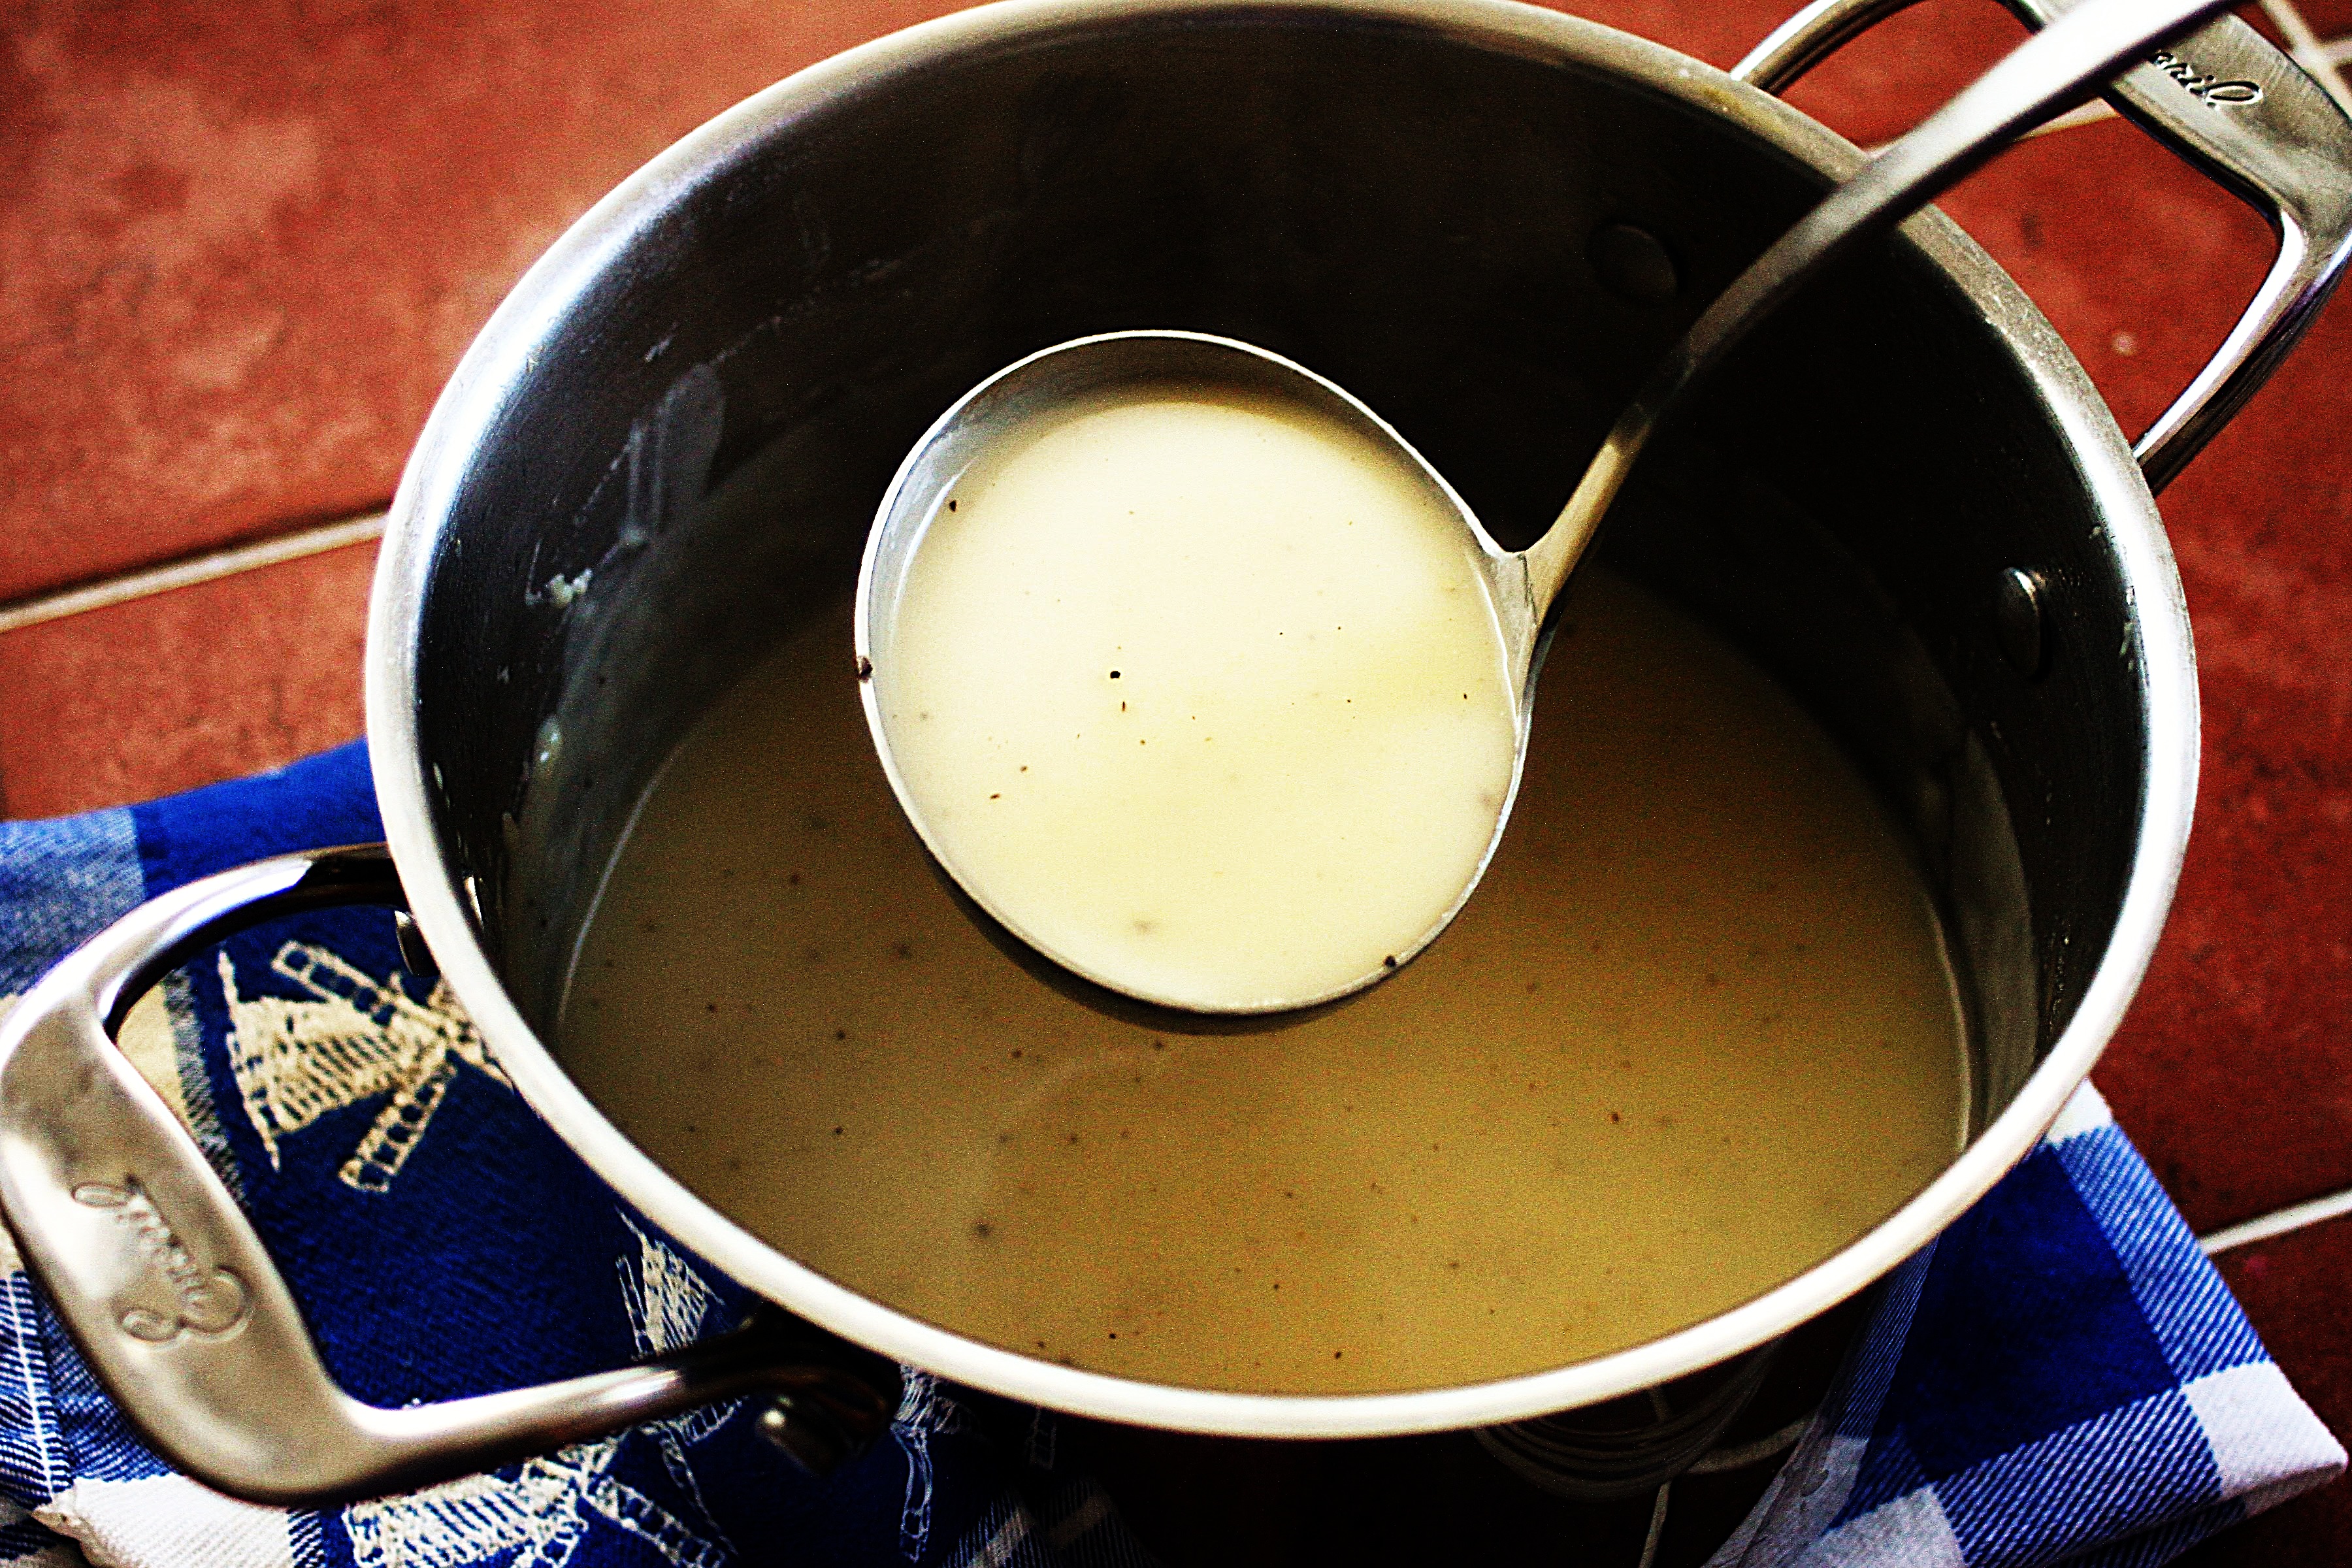 Stupid-Easy Recipe Basics: How To Make Gravy (#1 Top-Rated)